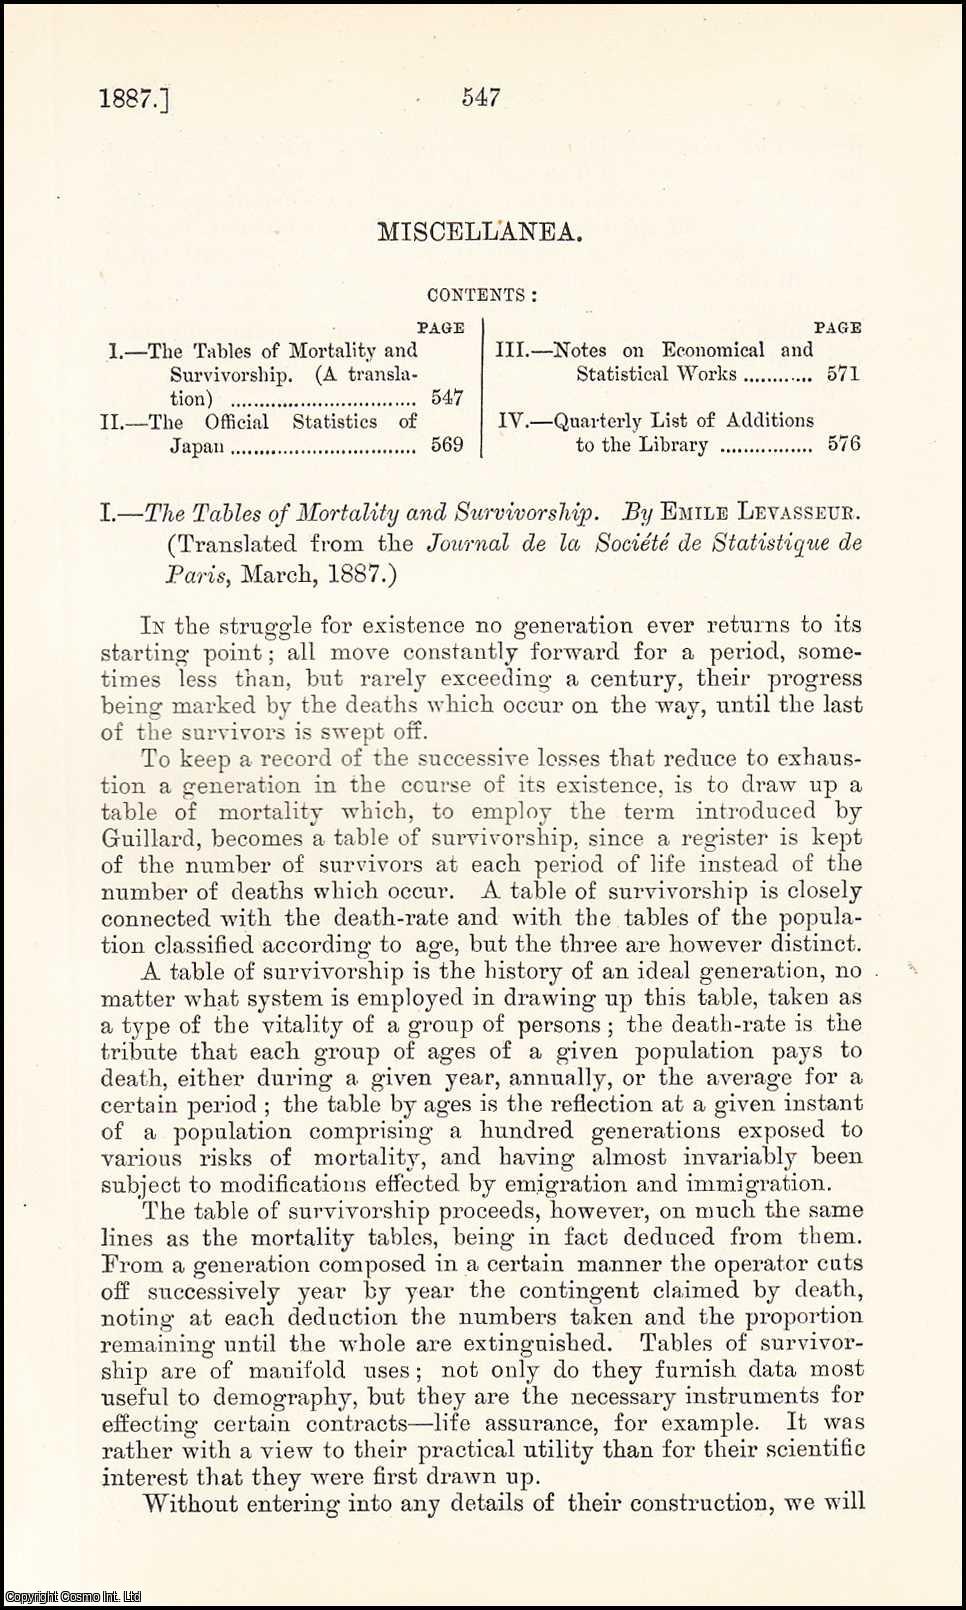 Emile Levasseur - The Tables of Mortality & Survivorship. An uncommon original article from the Journal of the Royal Statistical Society of London, 1887.